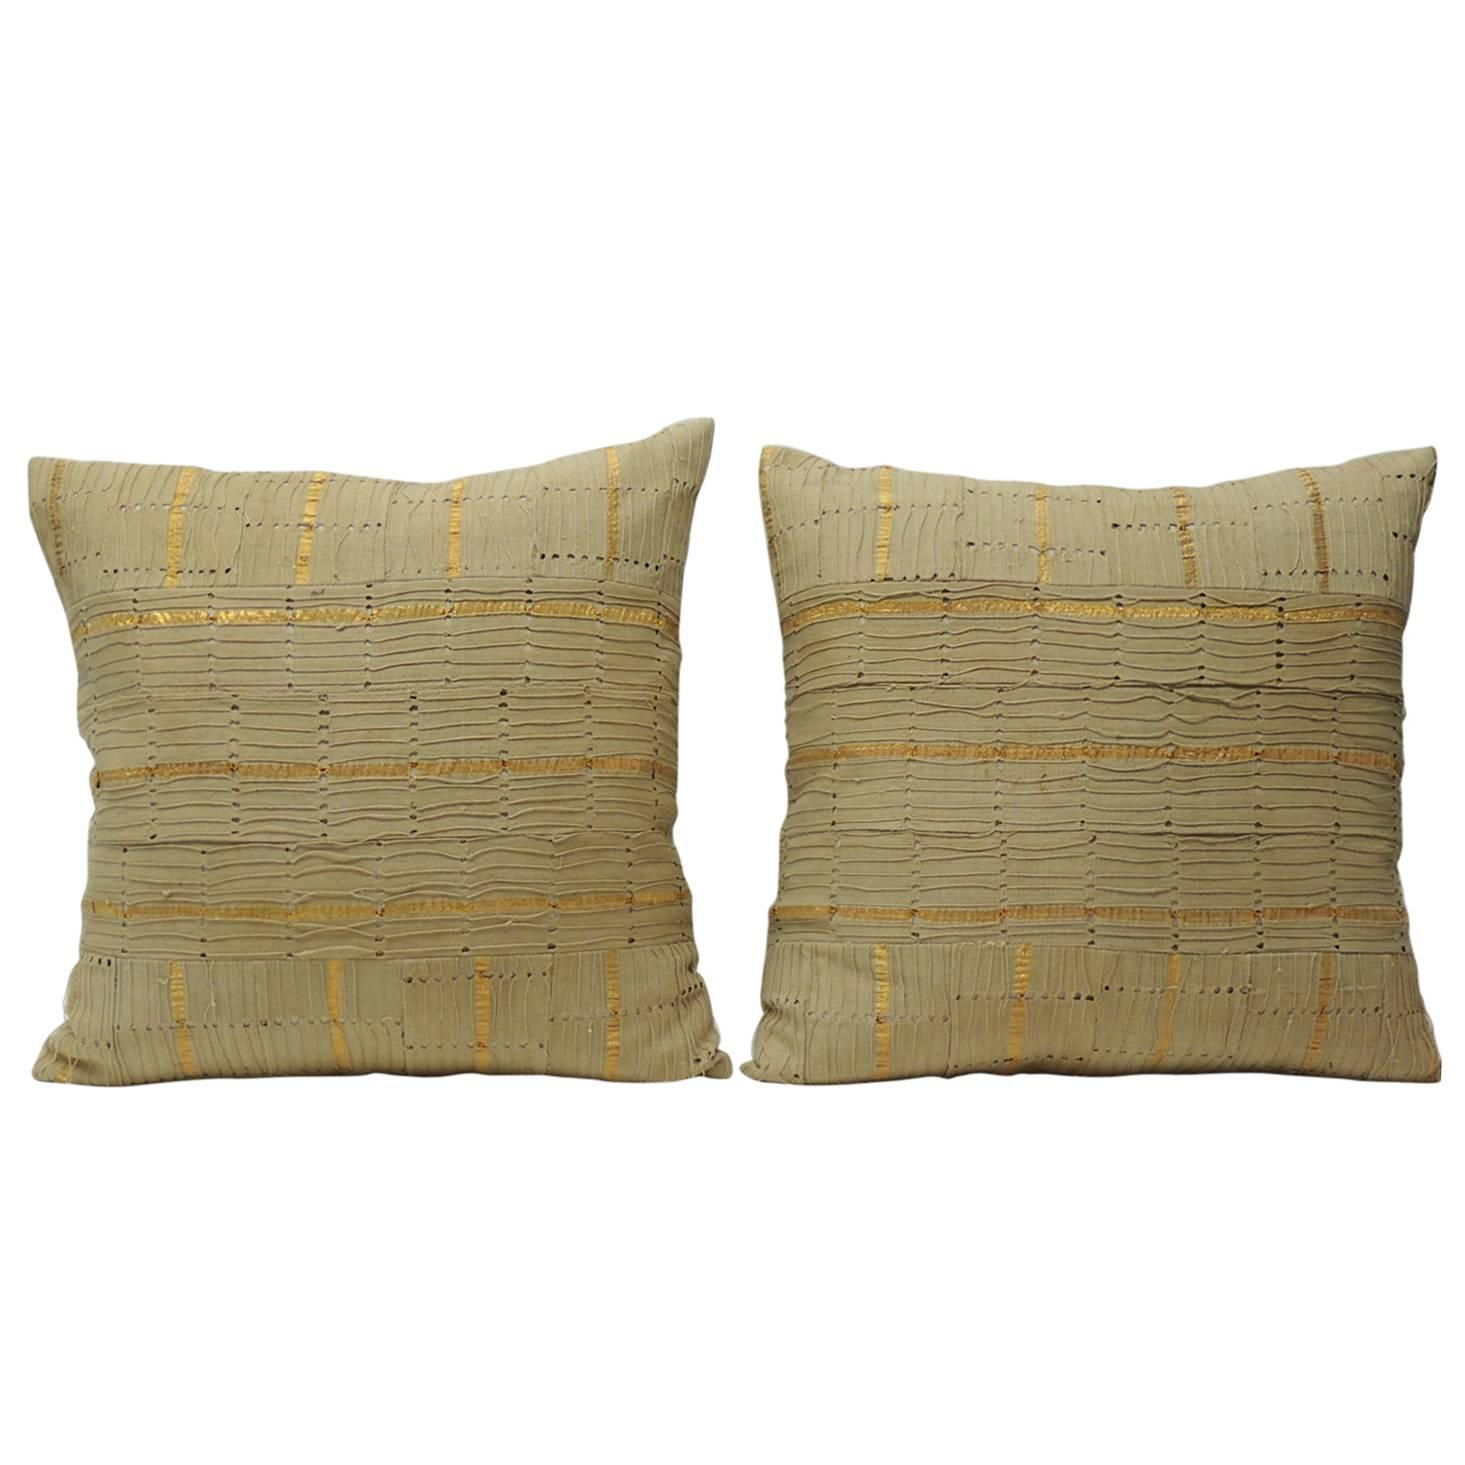 Pair of African Gold and Tan Decorative Pillows